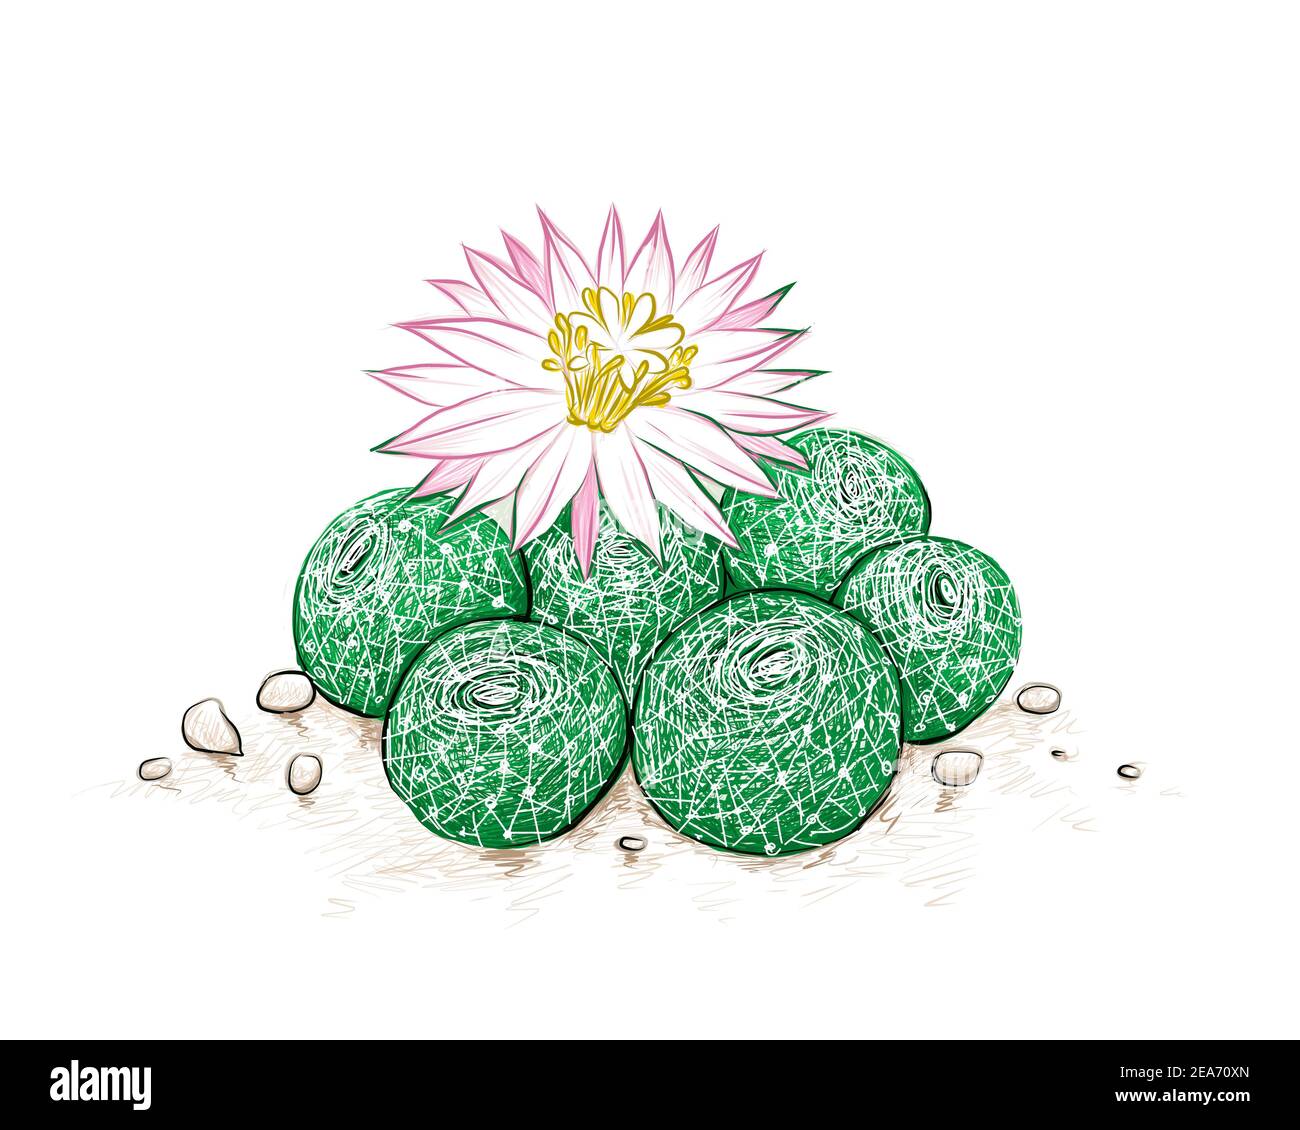 Illustration Hand Drawn Sketch of Rebutia Cactus with Pink Flower. A Succulent Plants with Sharp Thorns for Garden Decoration. Stock Photo